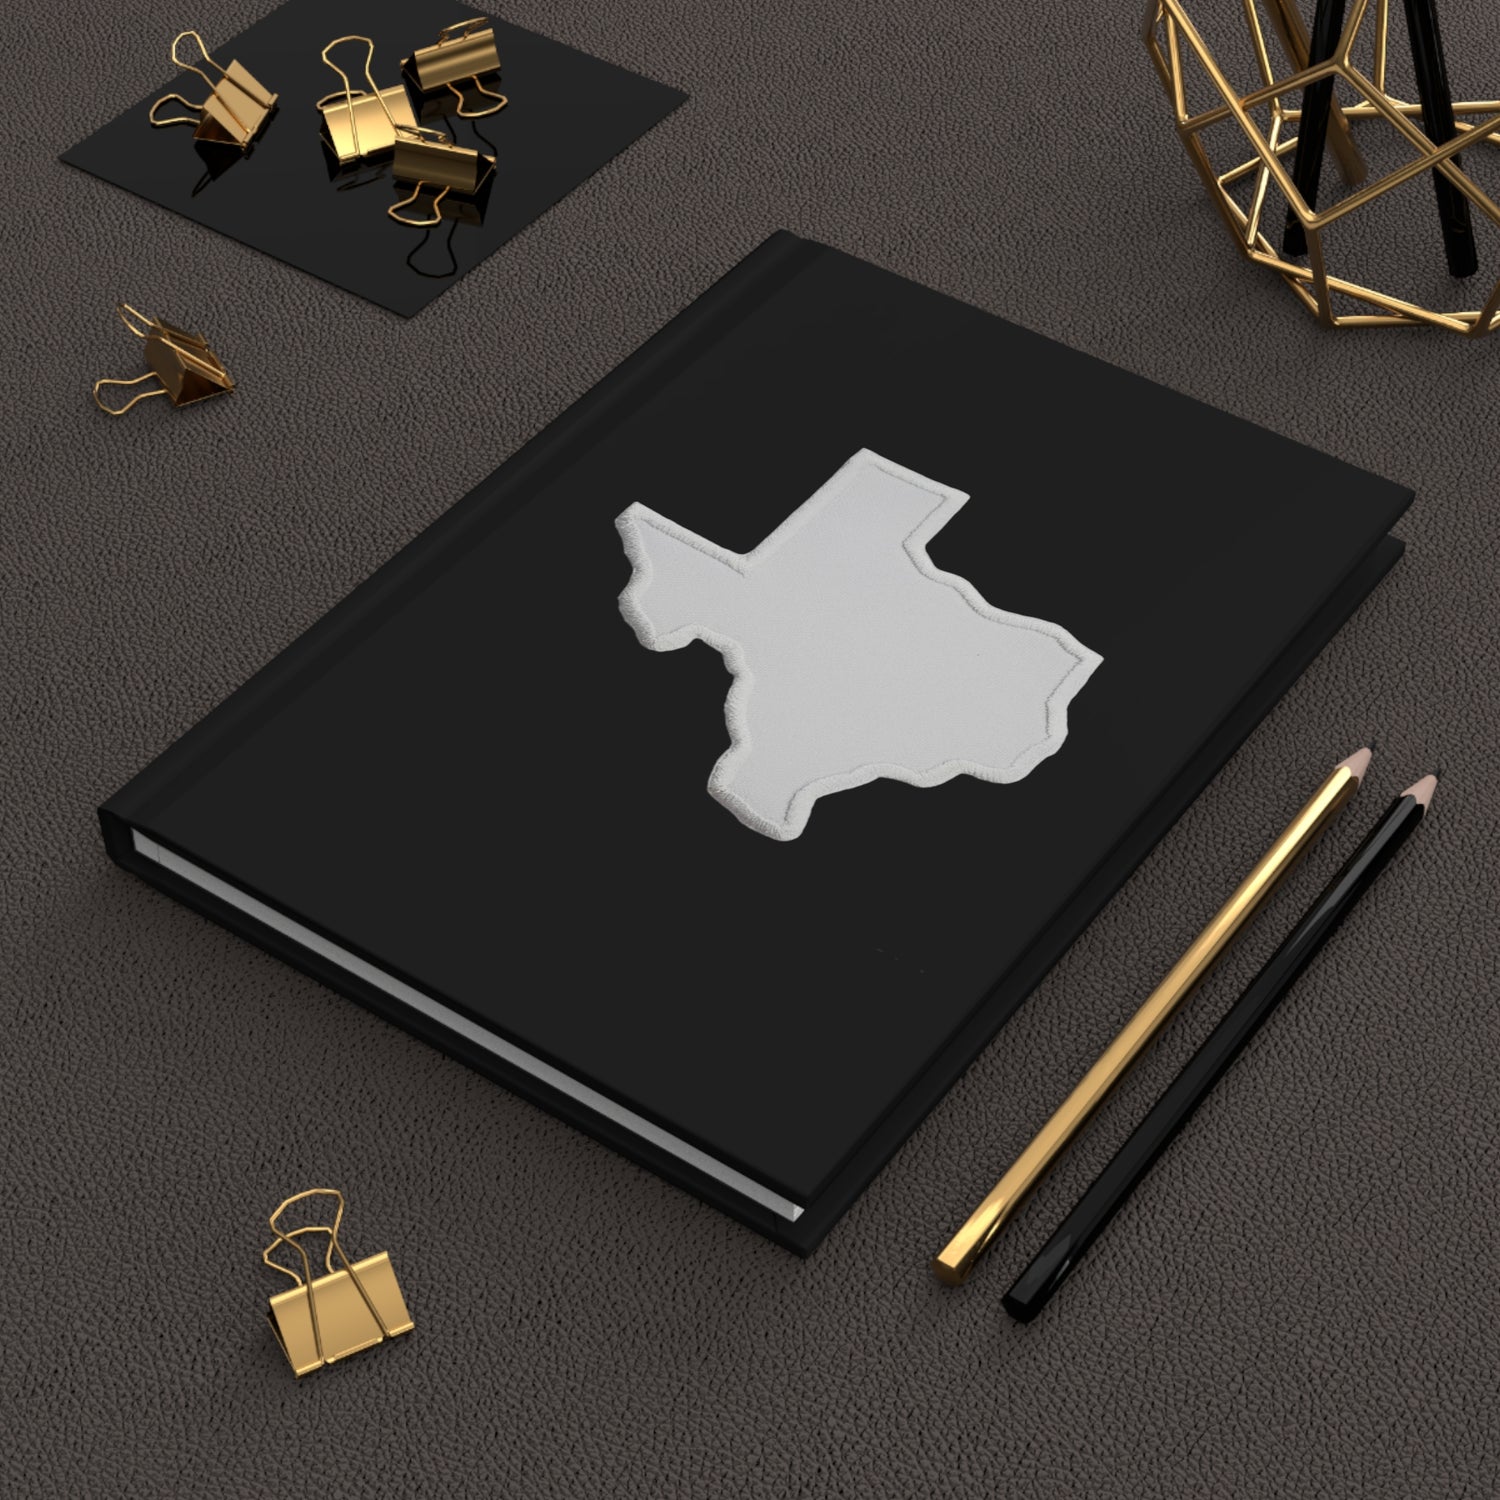 Texas Black and White Hardcover Journal Matte